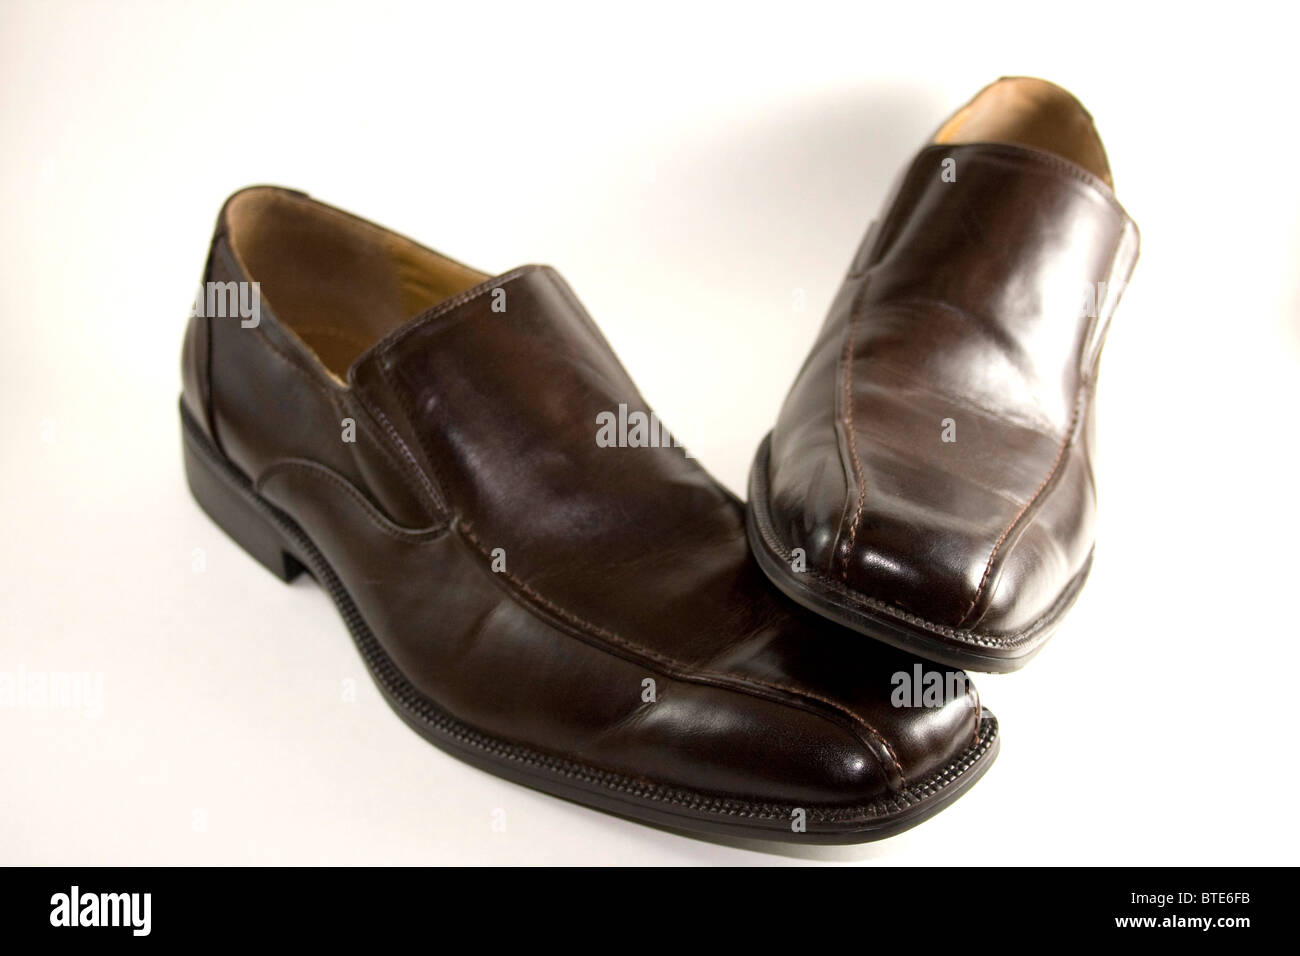 Brown Dress Shoes Stock Photo